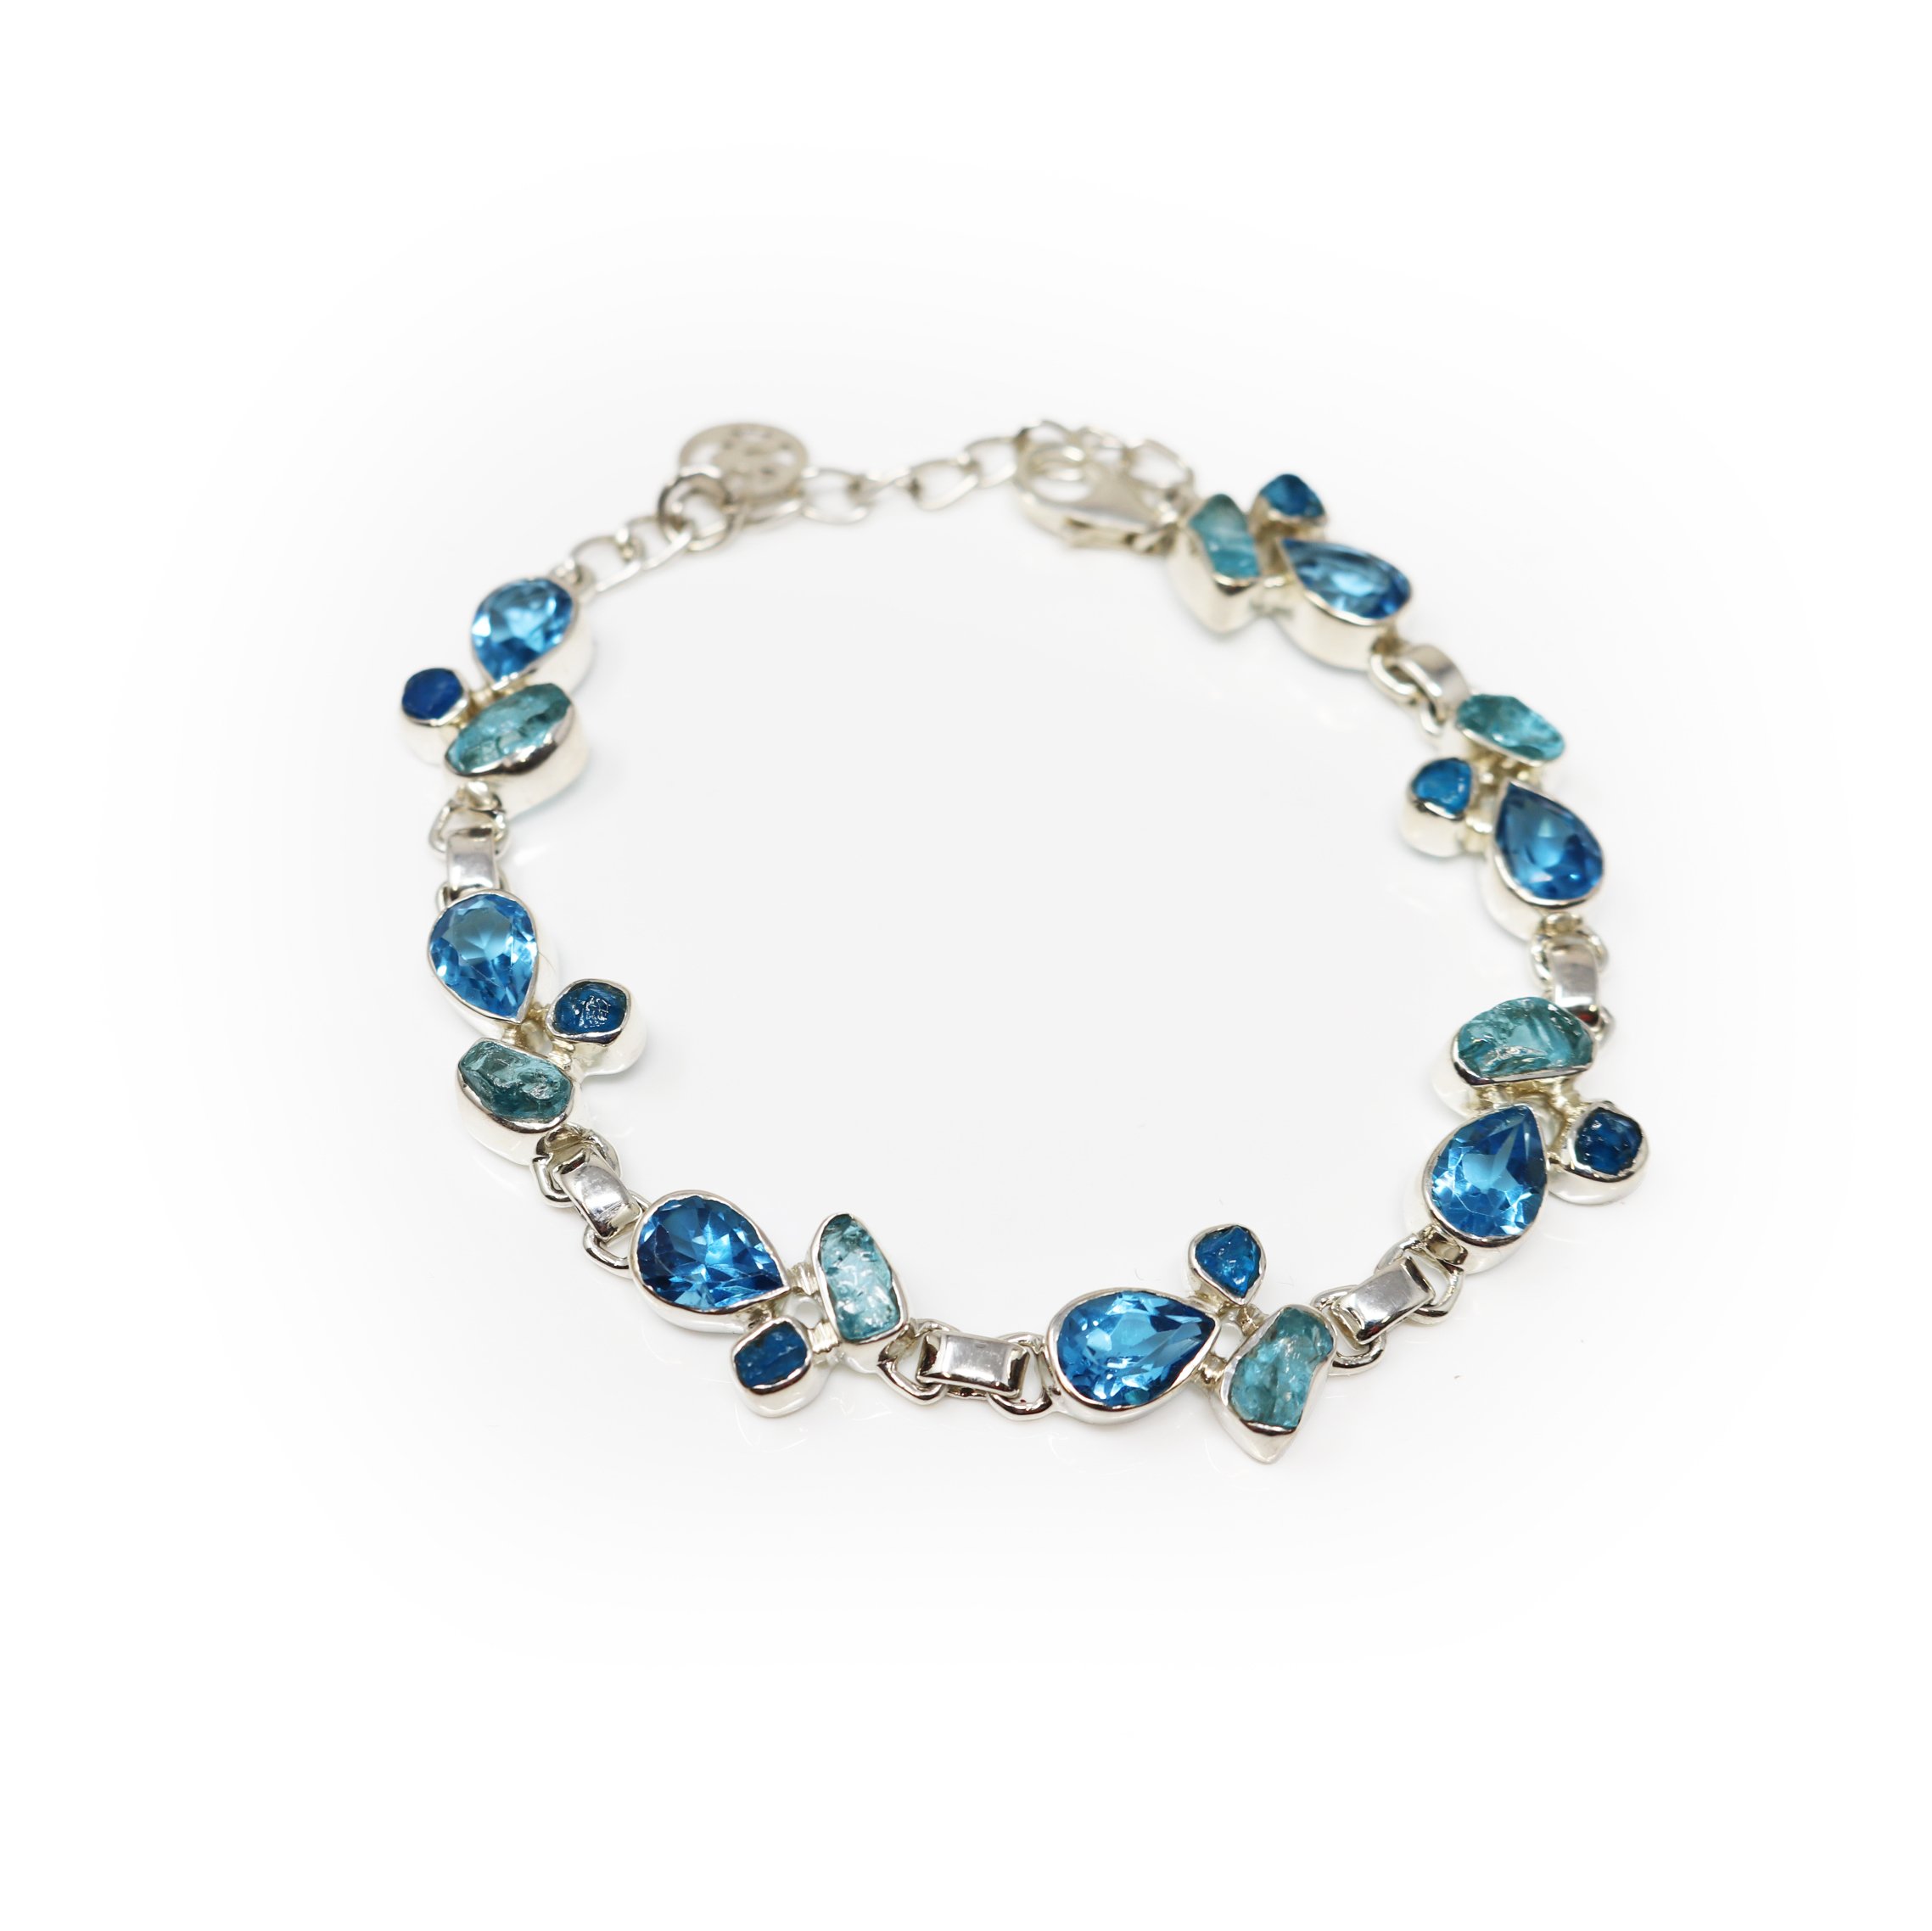 Blue Topaz Link Bracelet - 7 Faceted Pears with 14 Rough Blue Apatite Freeforms & 925 Sterling Silver Bezels